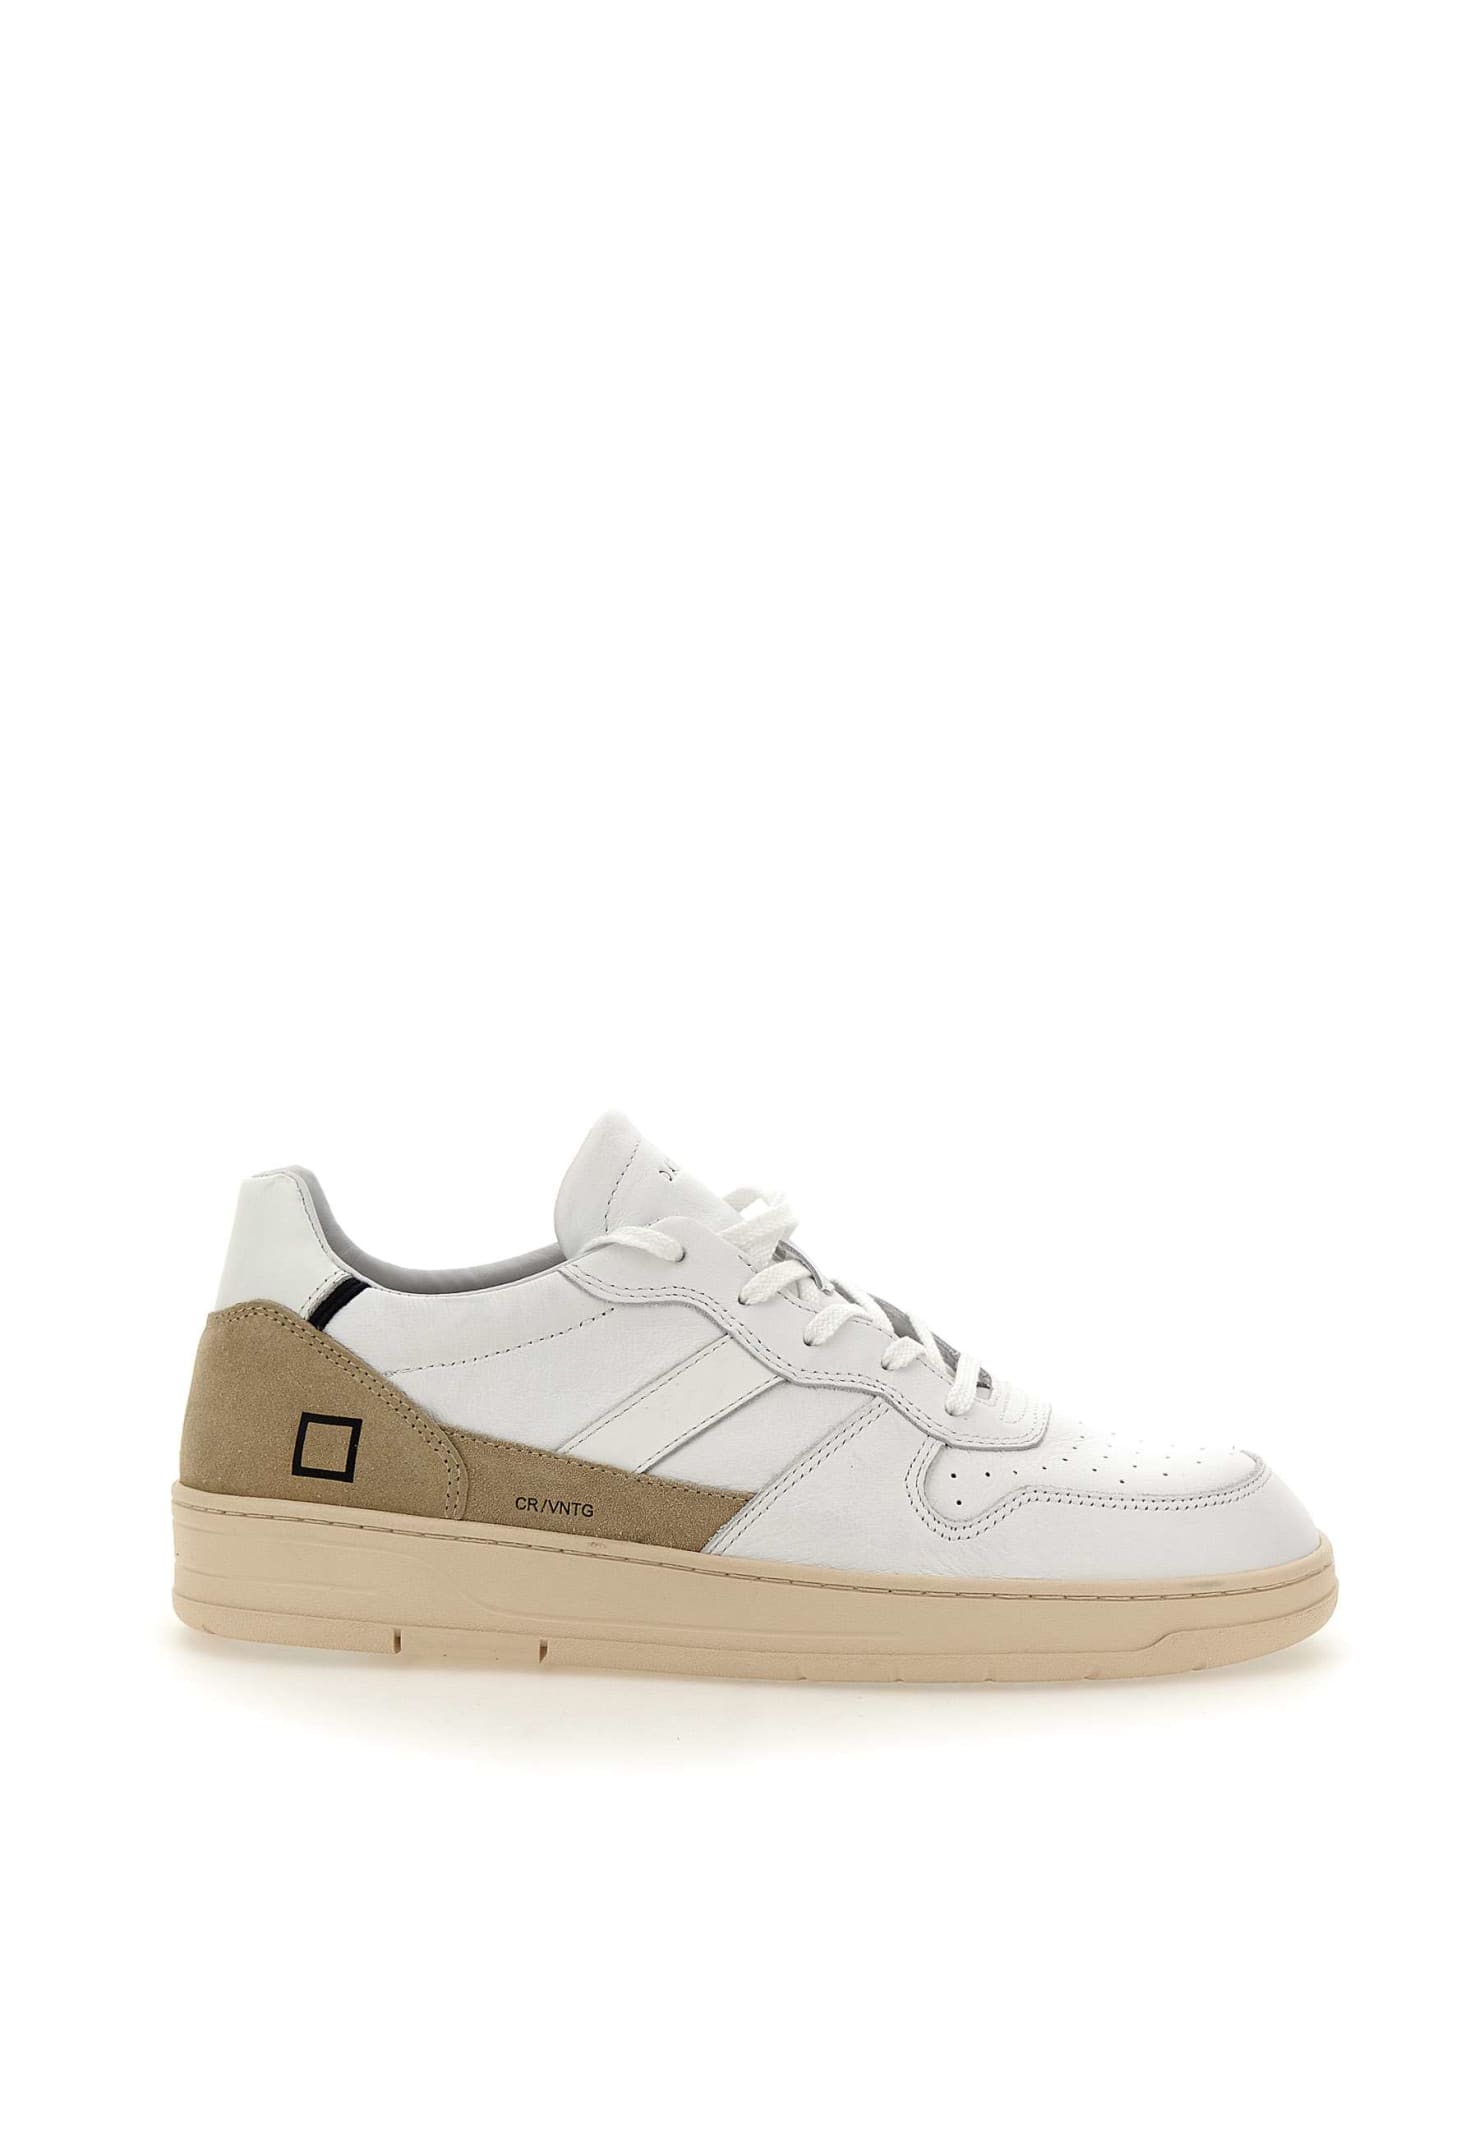 DATE COURT 2.0 VINTAGE LEATHER trainers